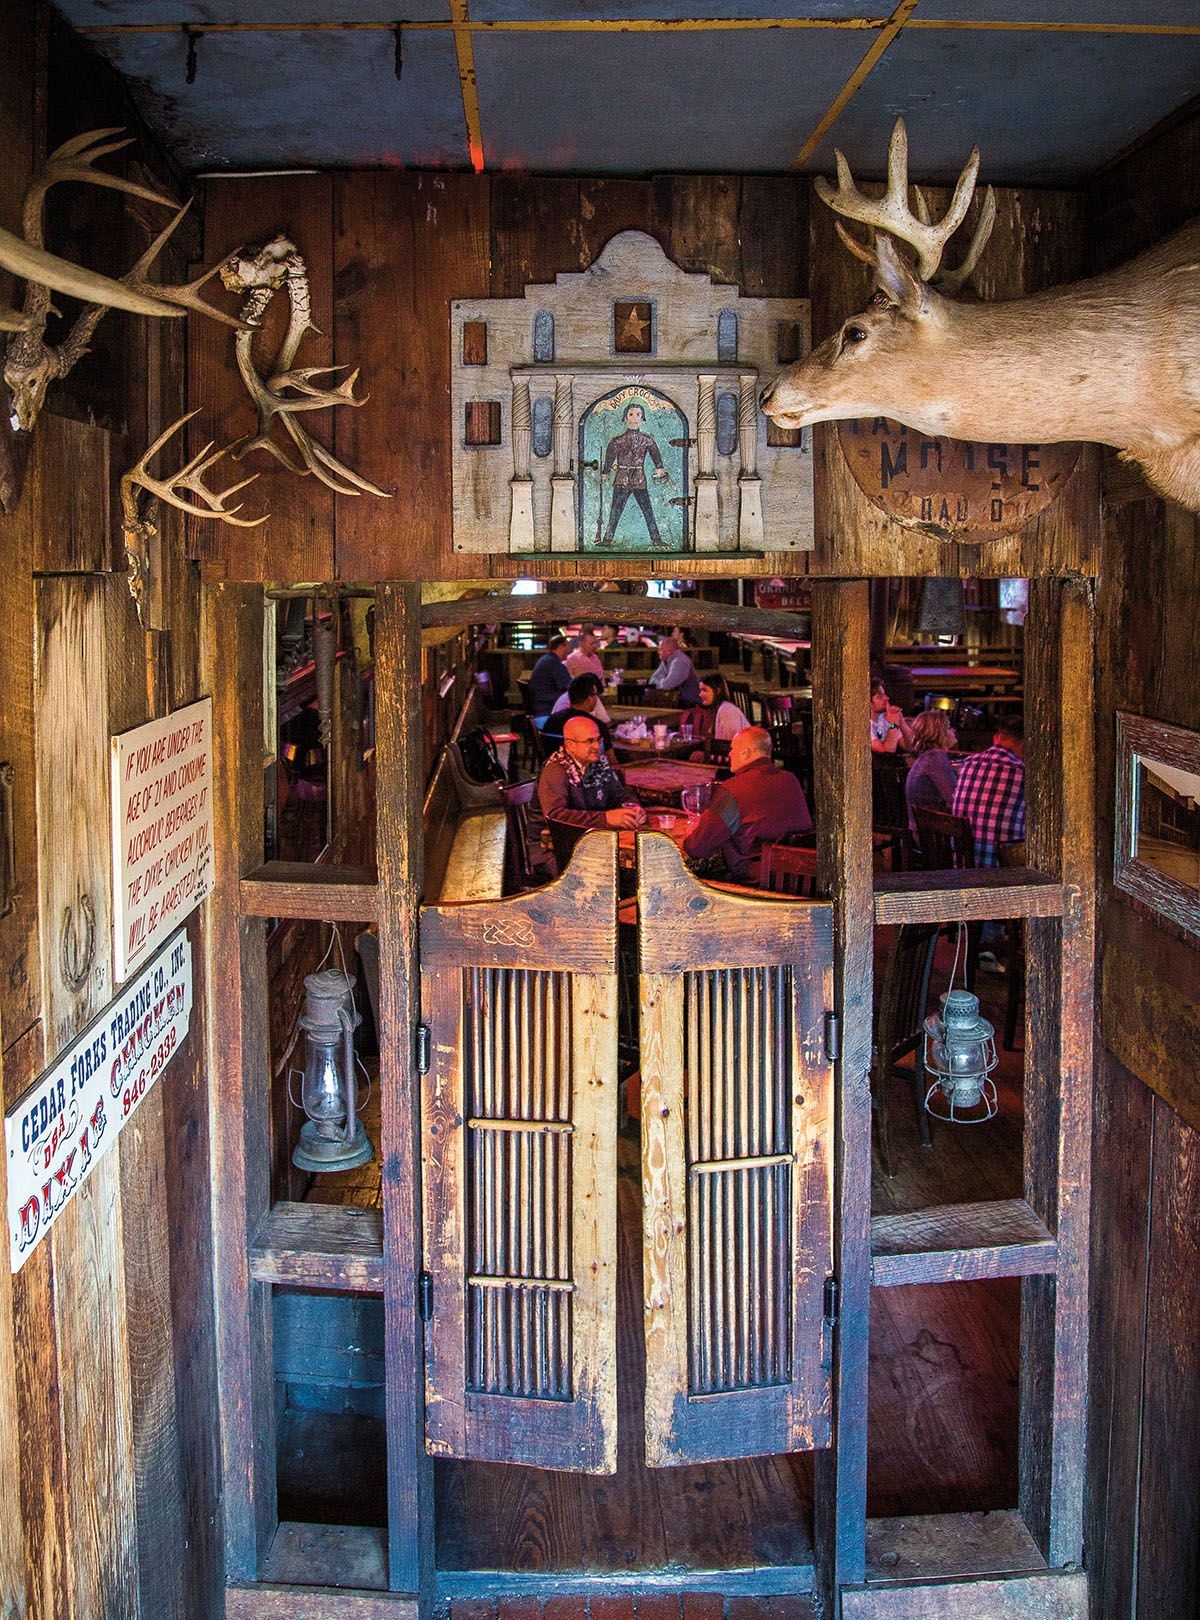 The entryway of an ornately-decorated dive bar with animal heads and wooden saloon doors